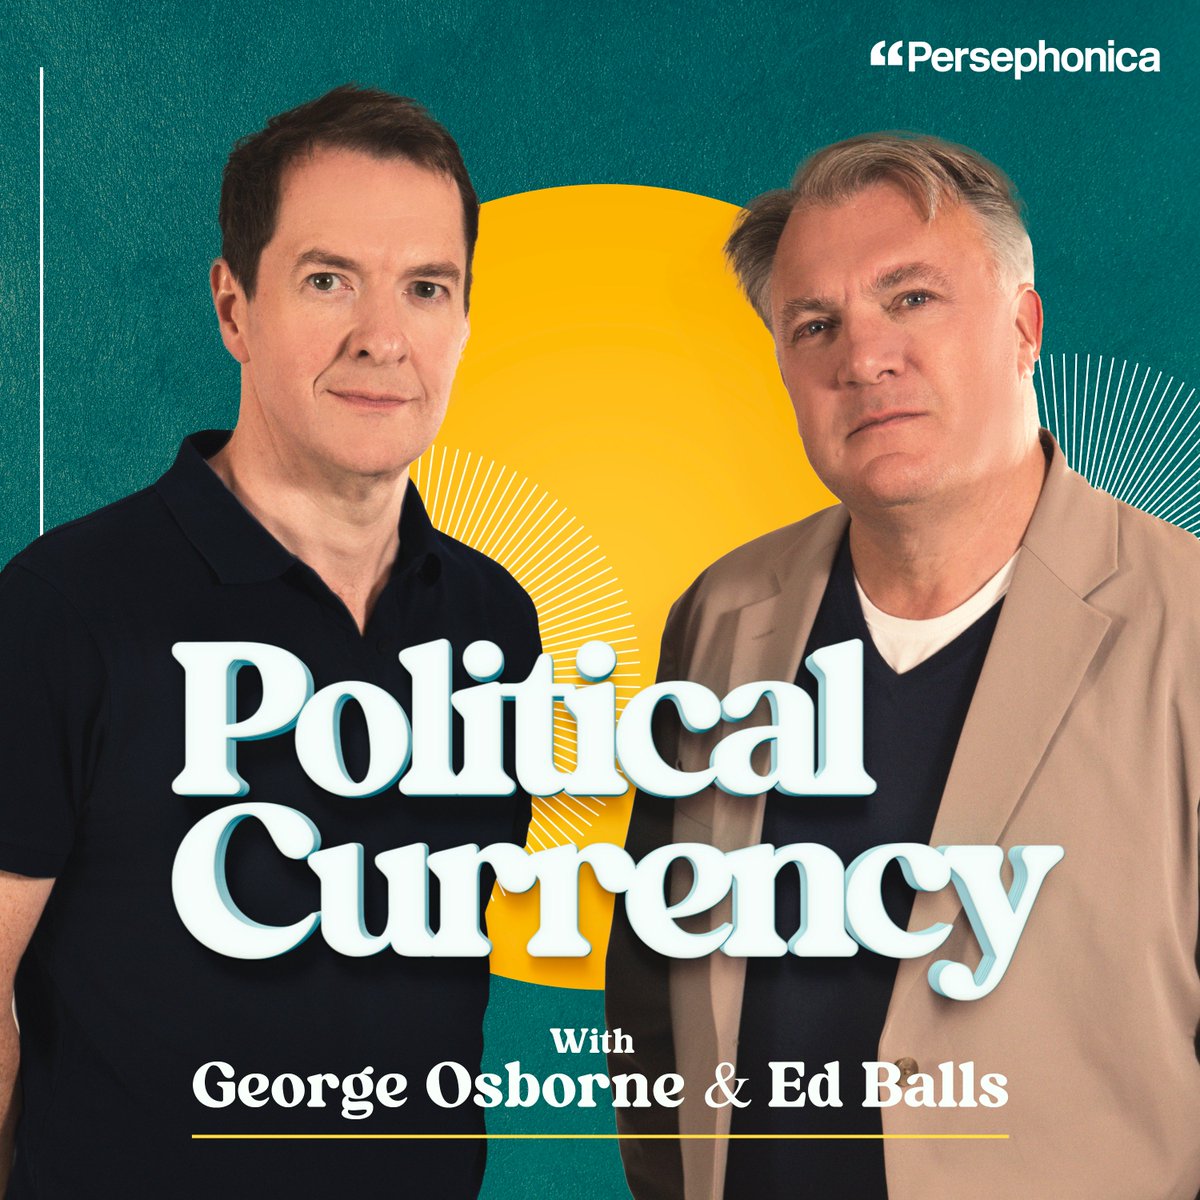 Missing your Political Currency fix this evening? Don’t worry - we’re on our way. George Osborne is in Stanford California this week, so we’ve got a show jam-packed with UK-US political gossip… but on West Coast time.